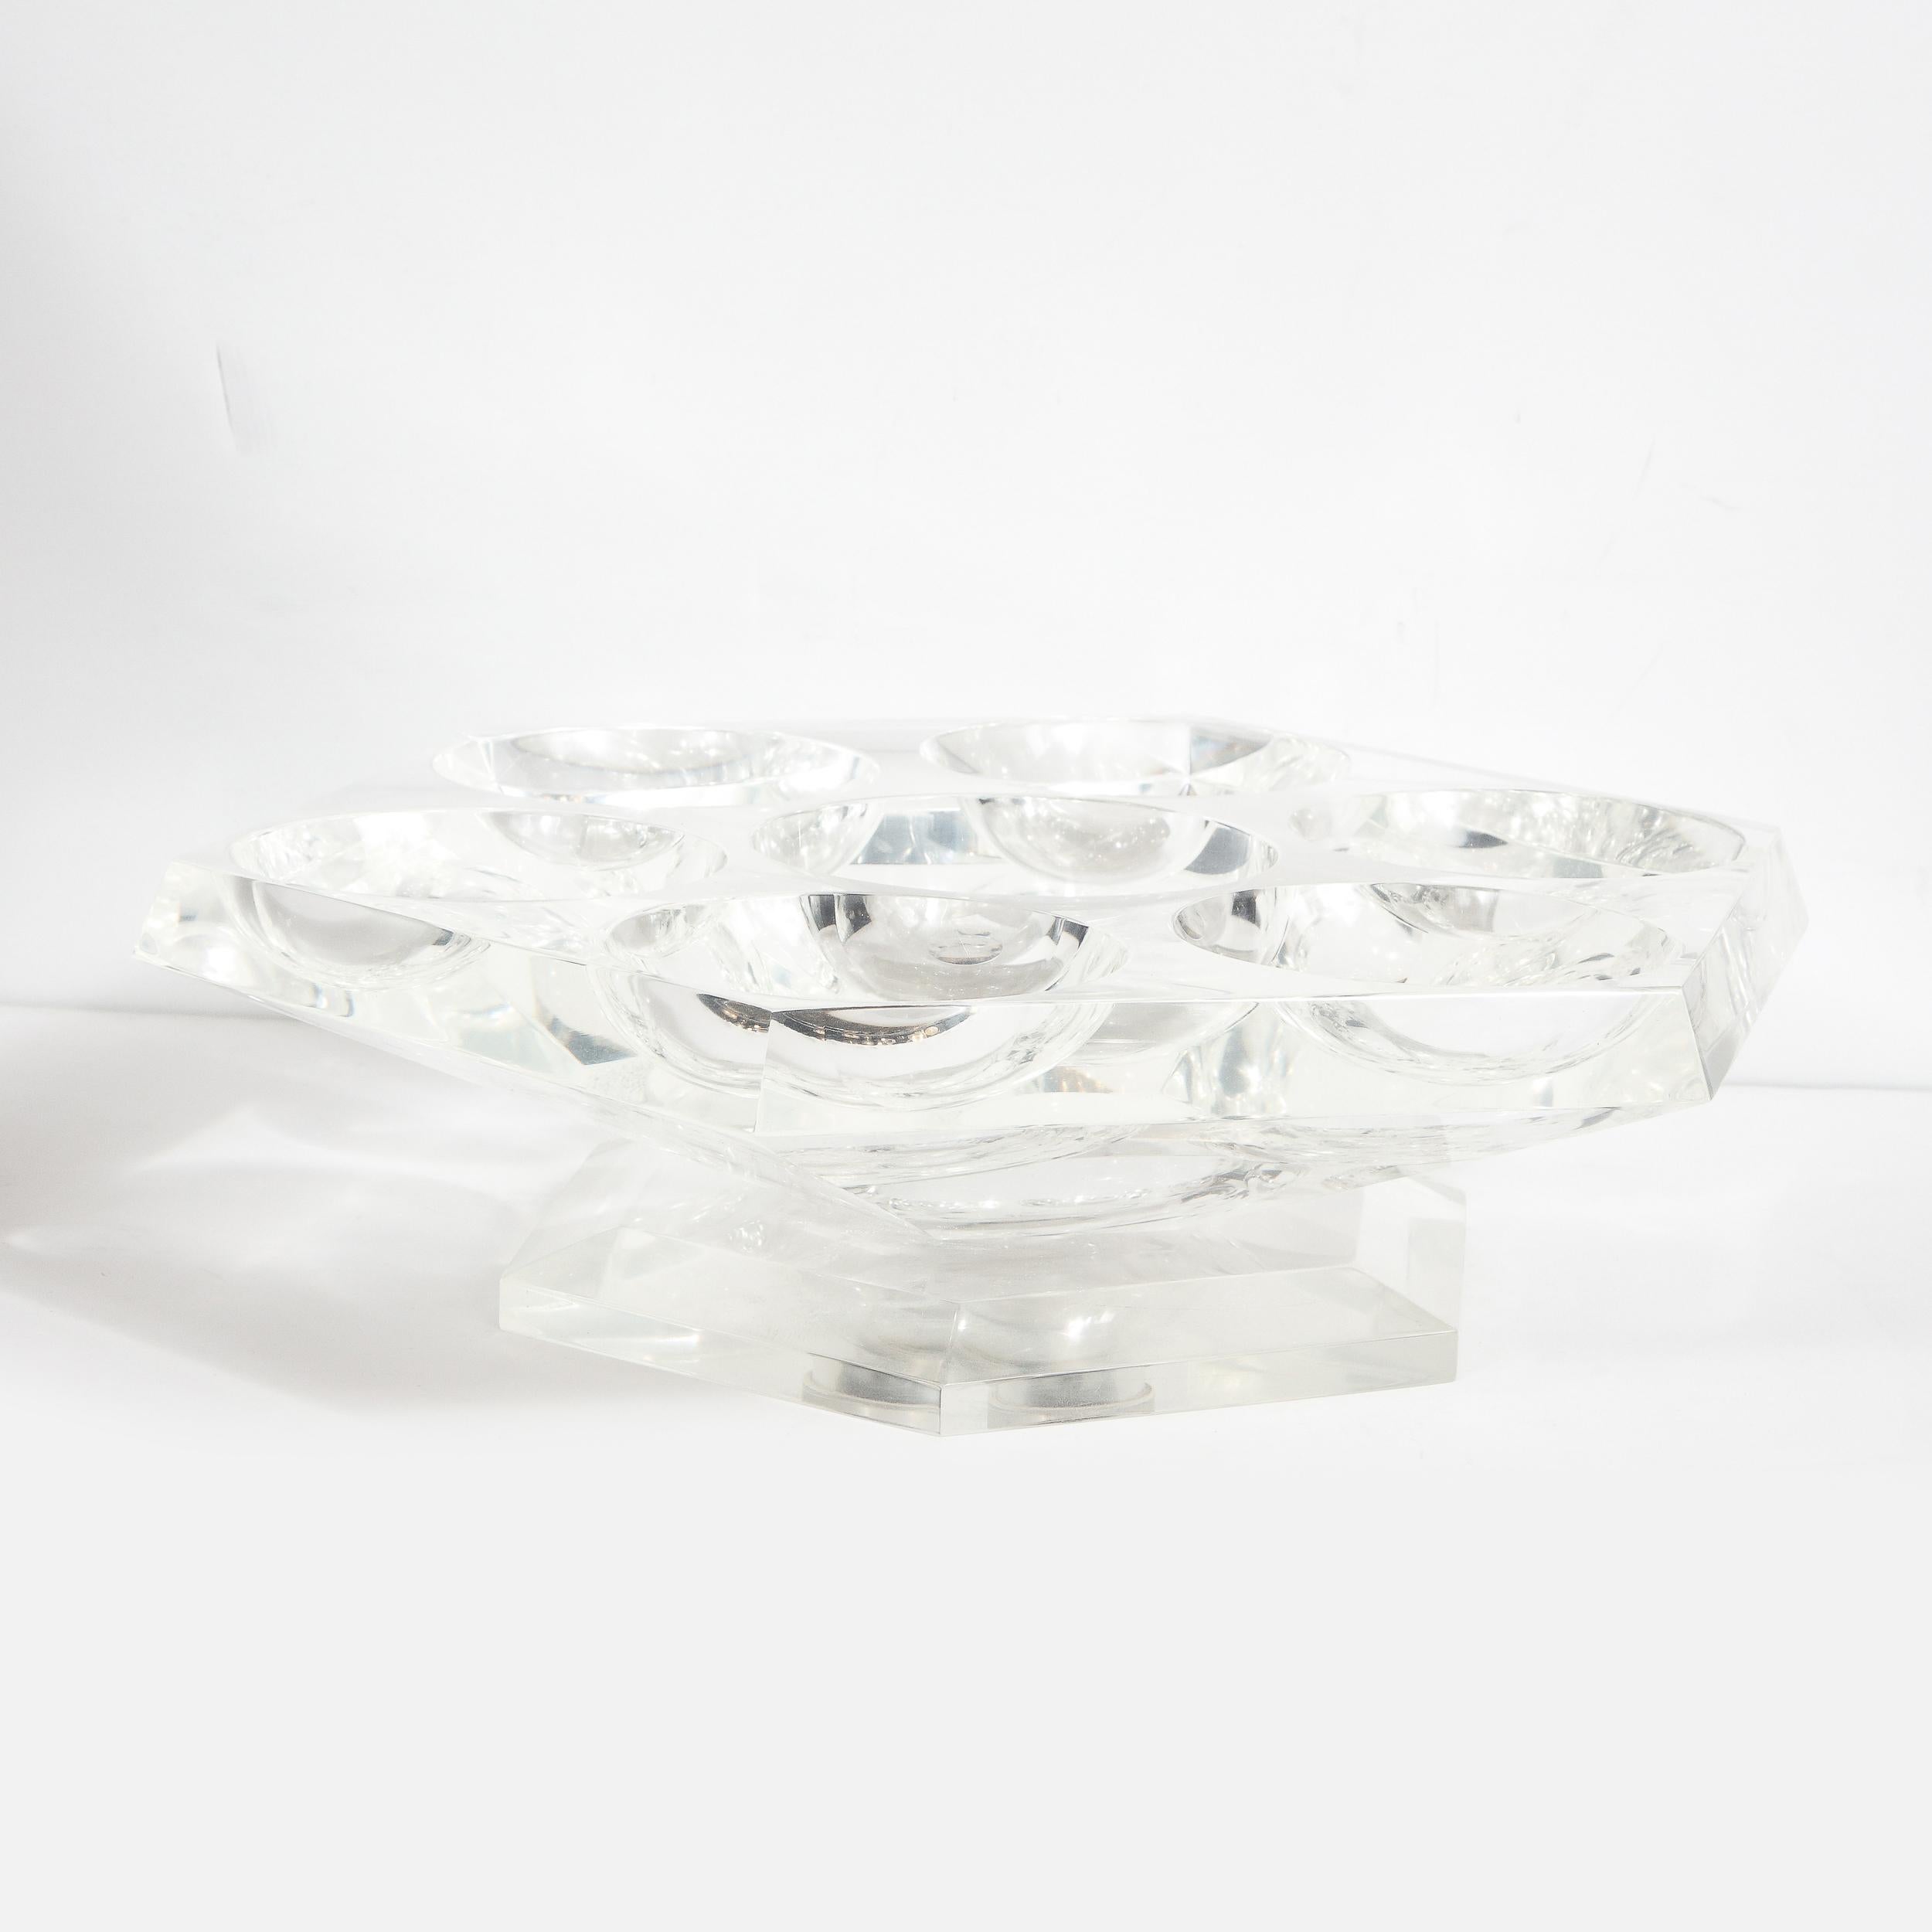 Late 20th Century Midcentury Hexagonal Lucite Rotating Tray with Concave Serving Indentations